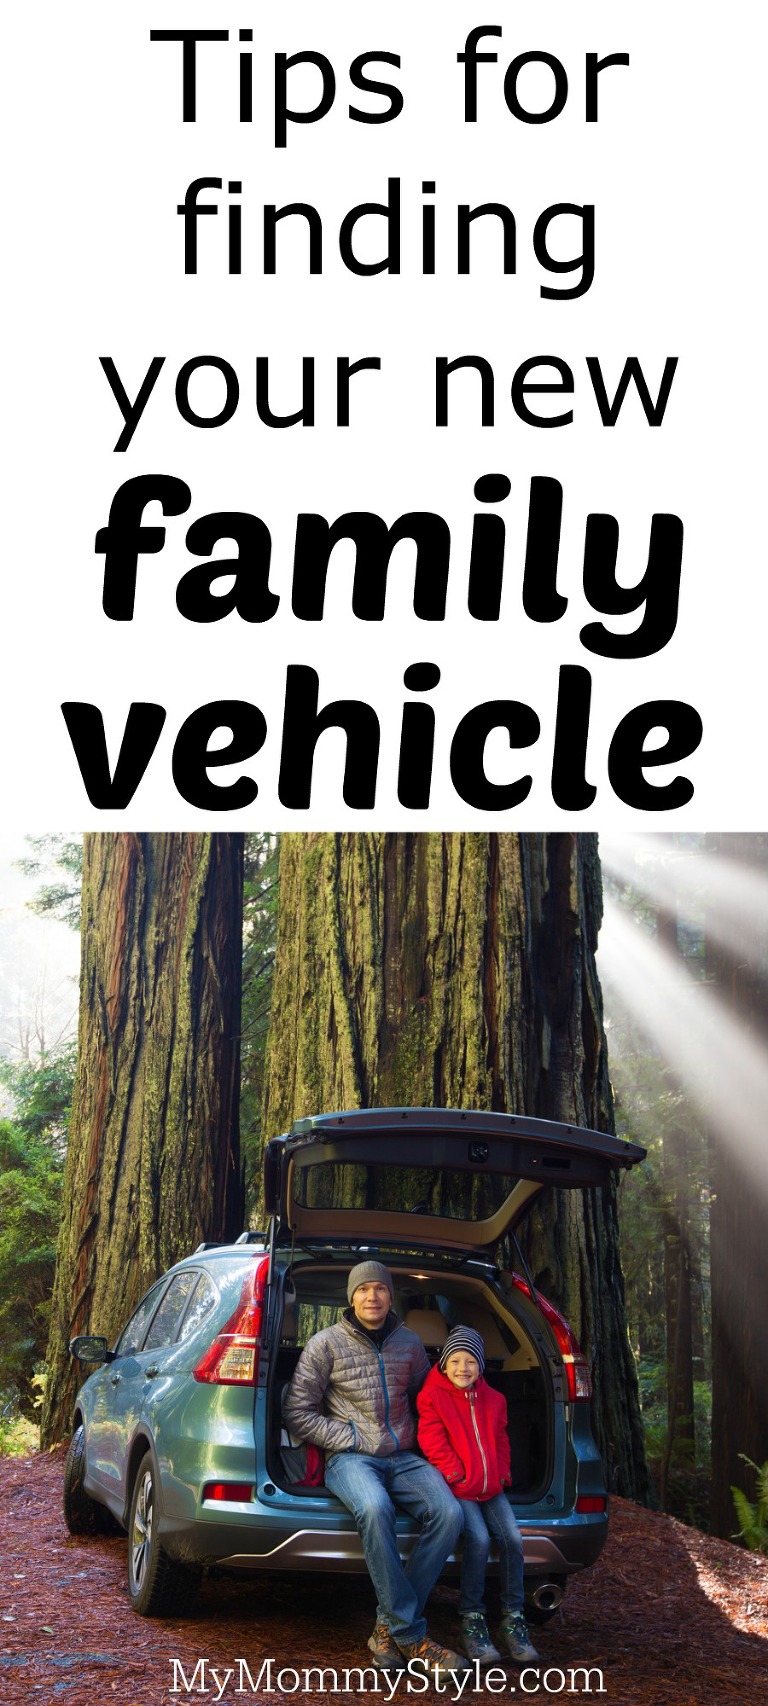 Tips for finding a new family vehicle